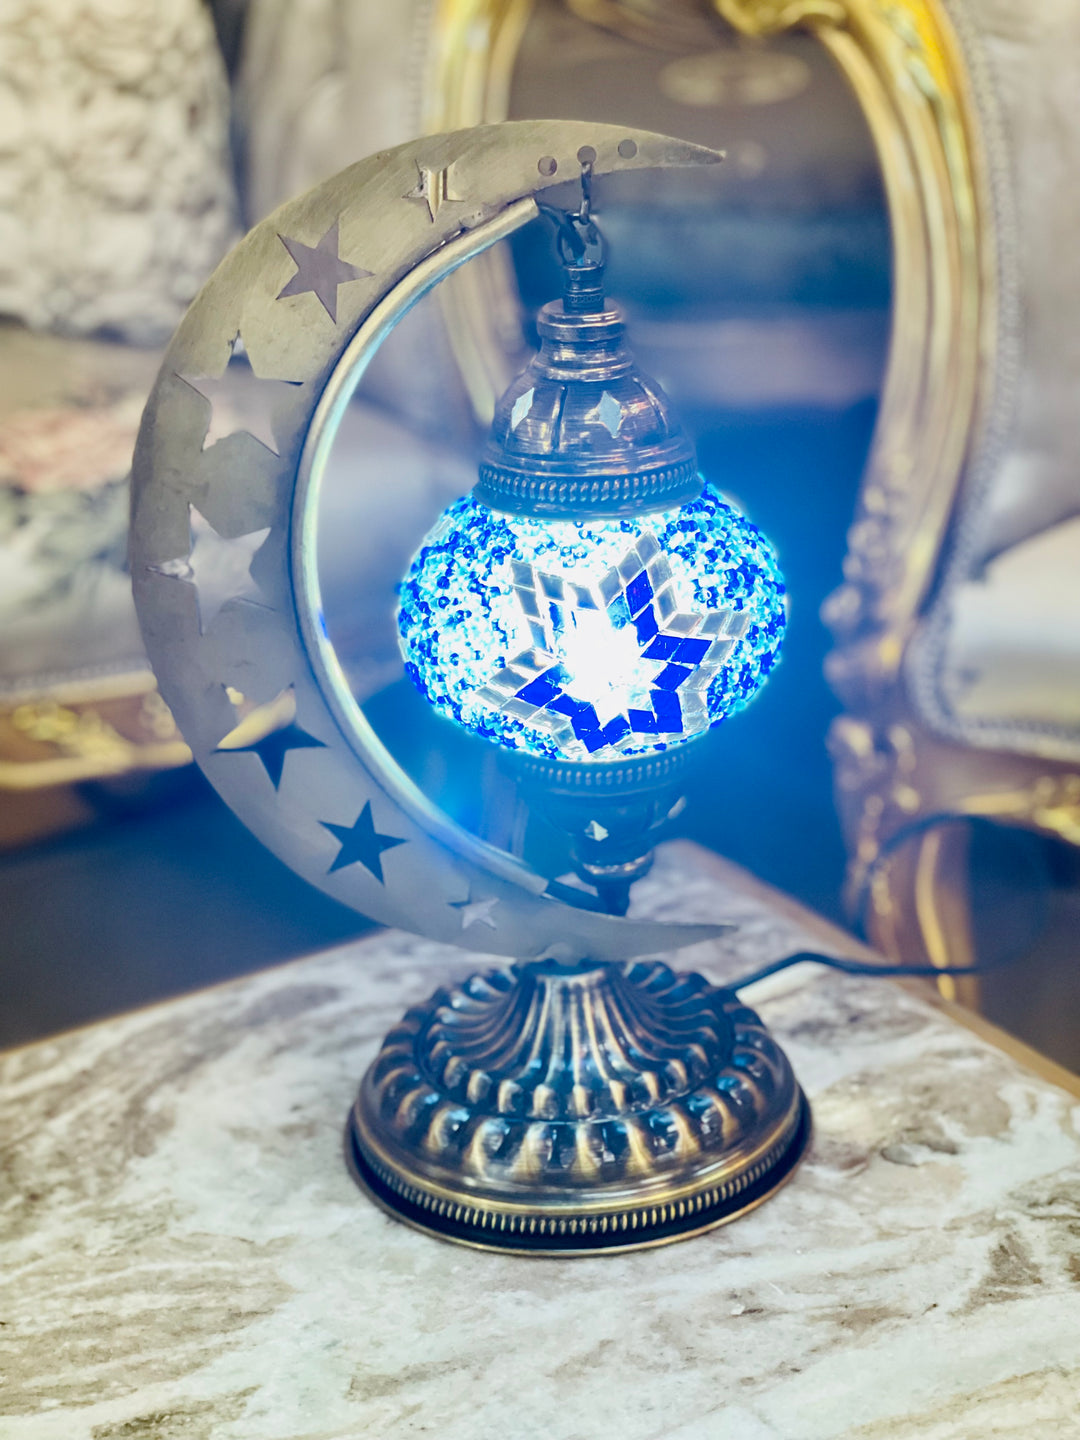 8 Colors | Turkish mosaic crescent Star shaped table lamp.